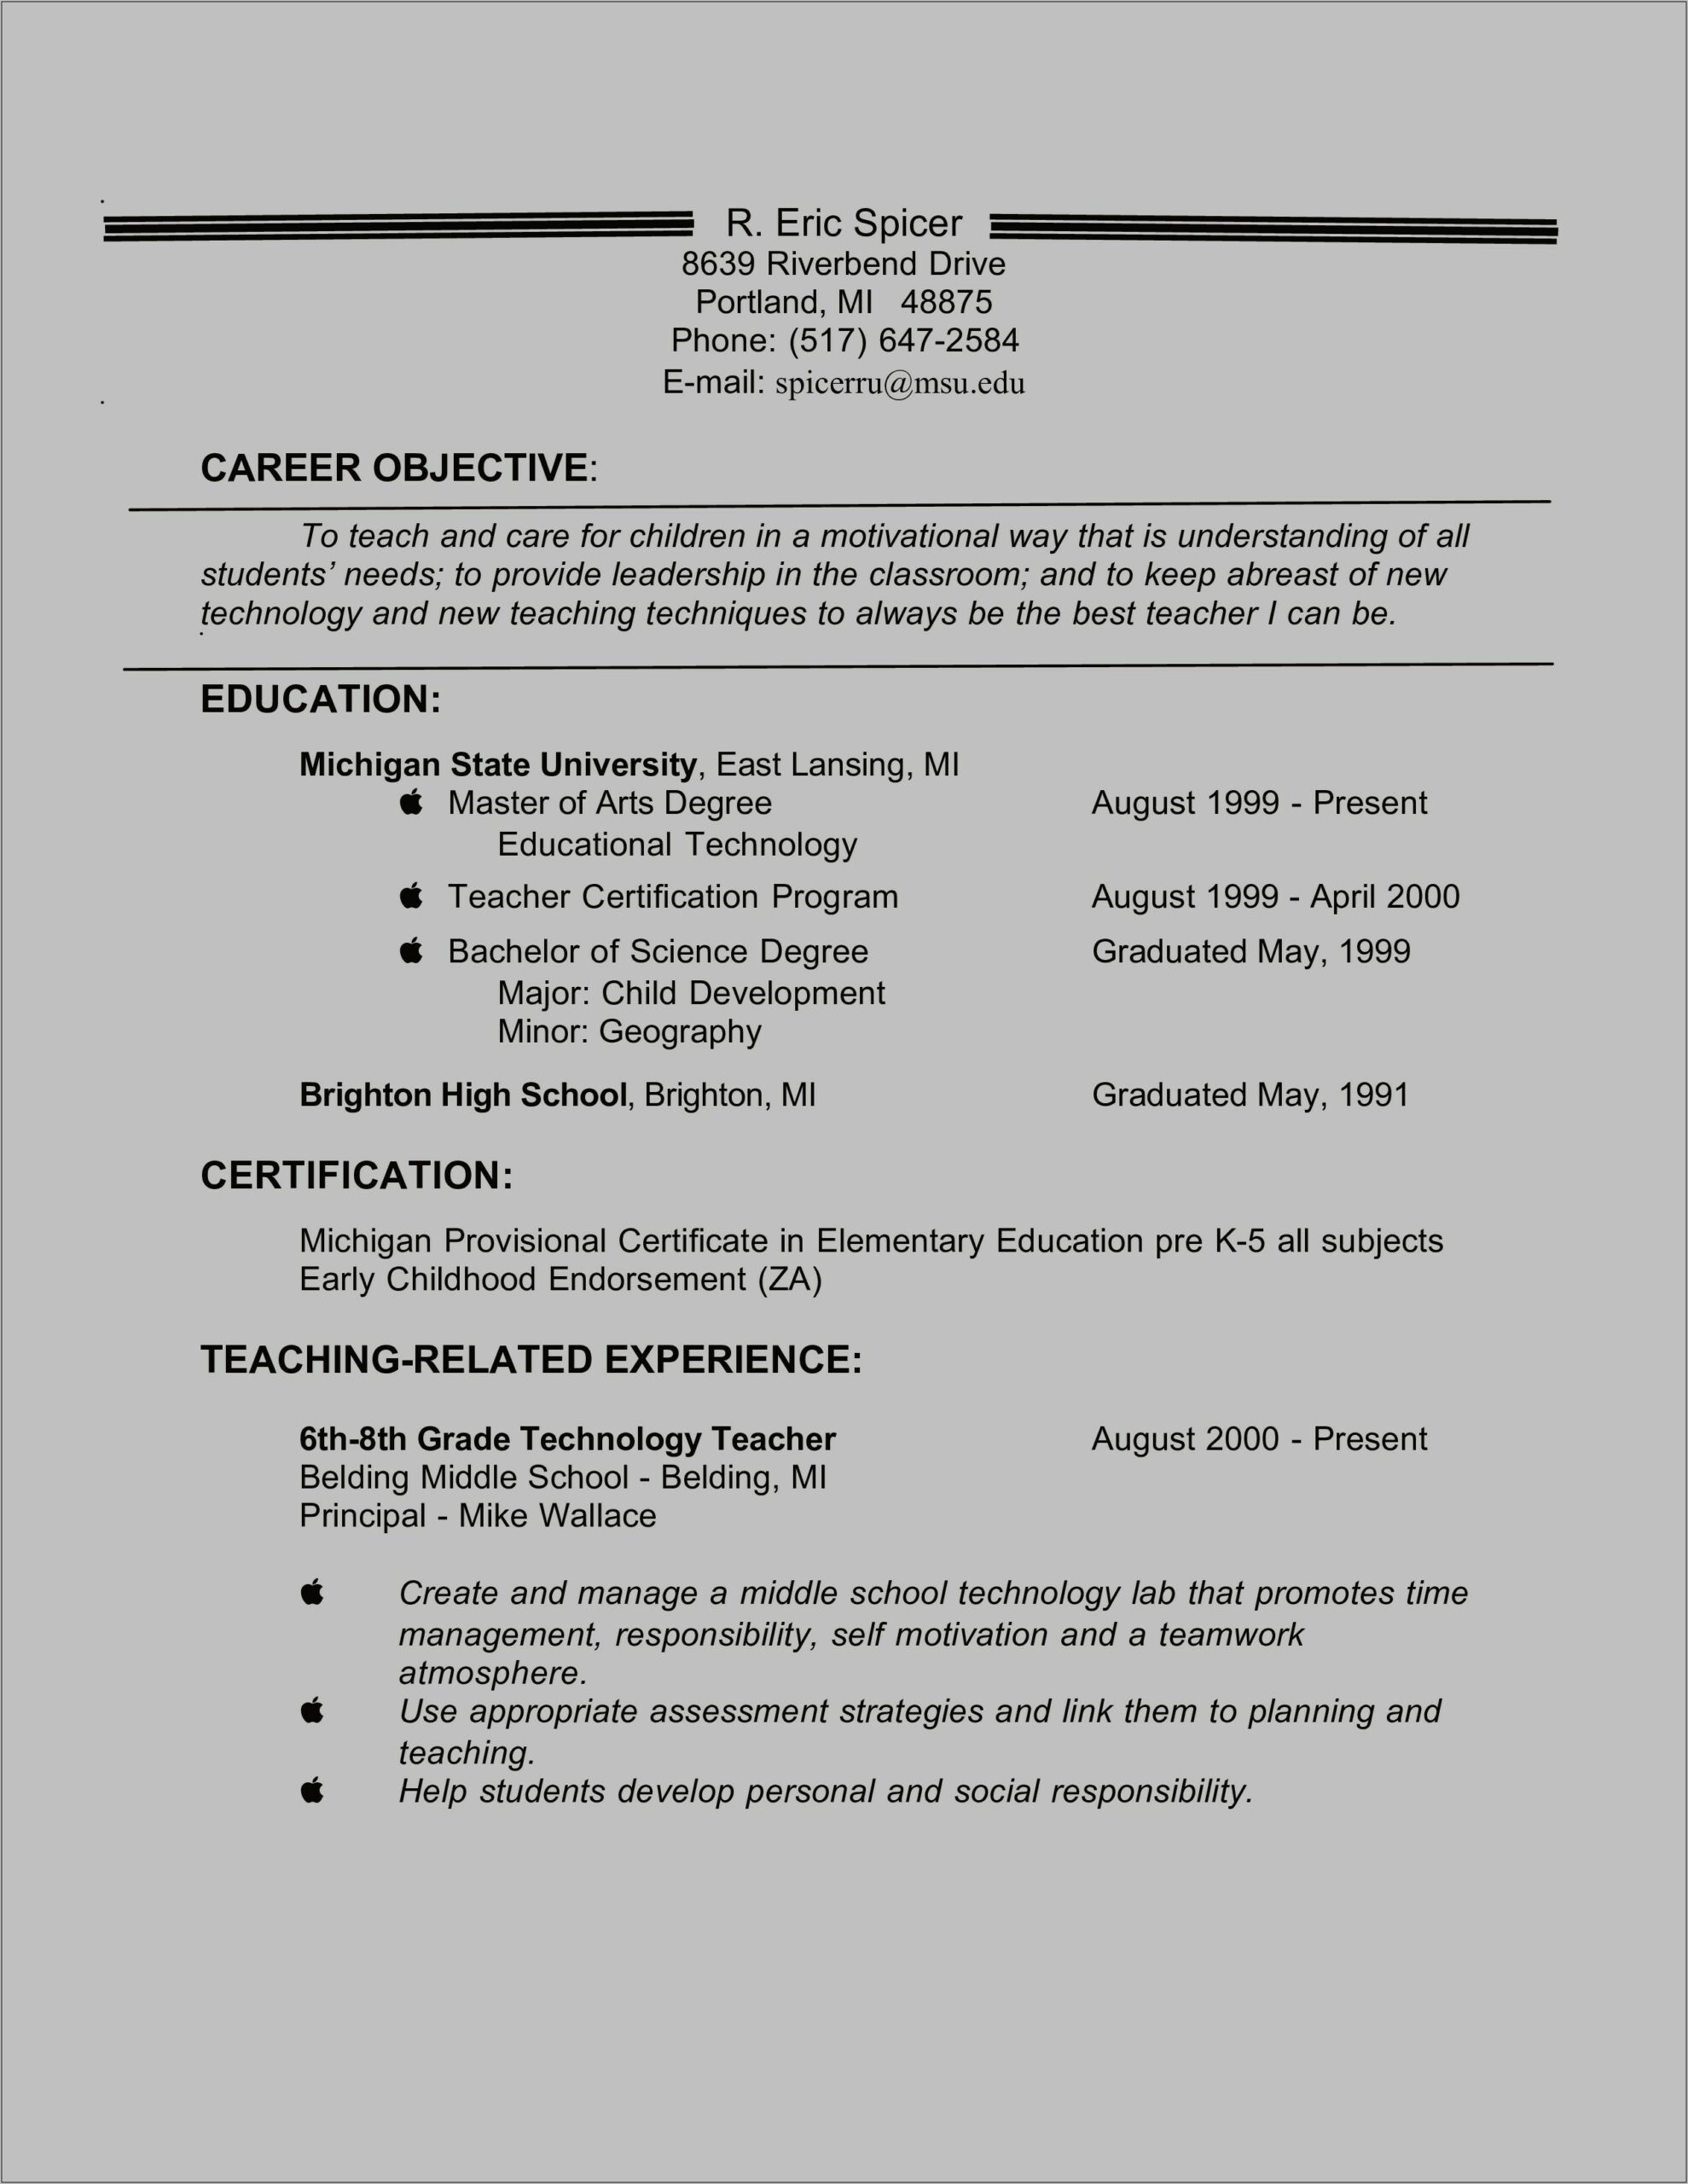 resume career objective for experienced